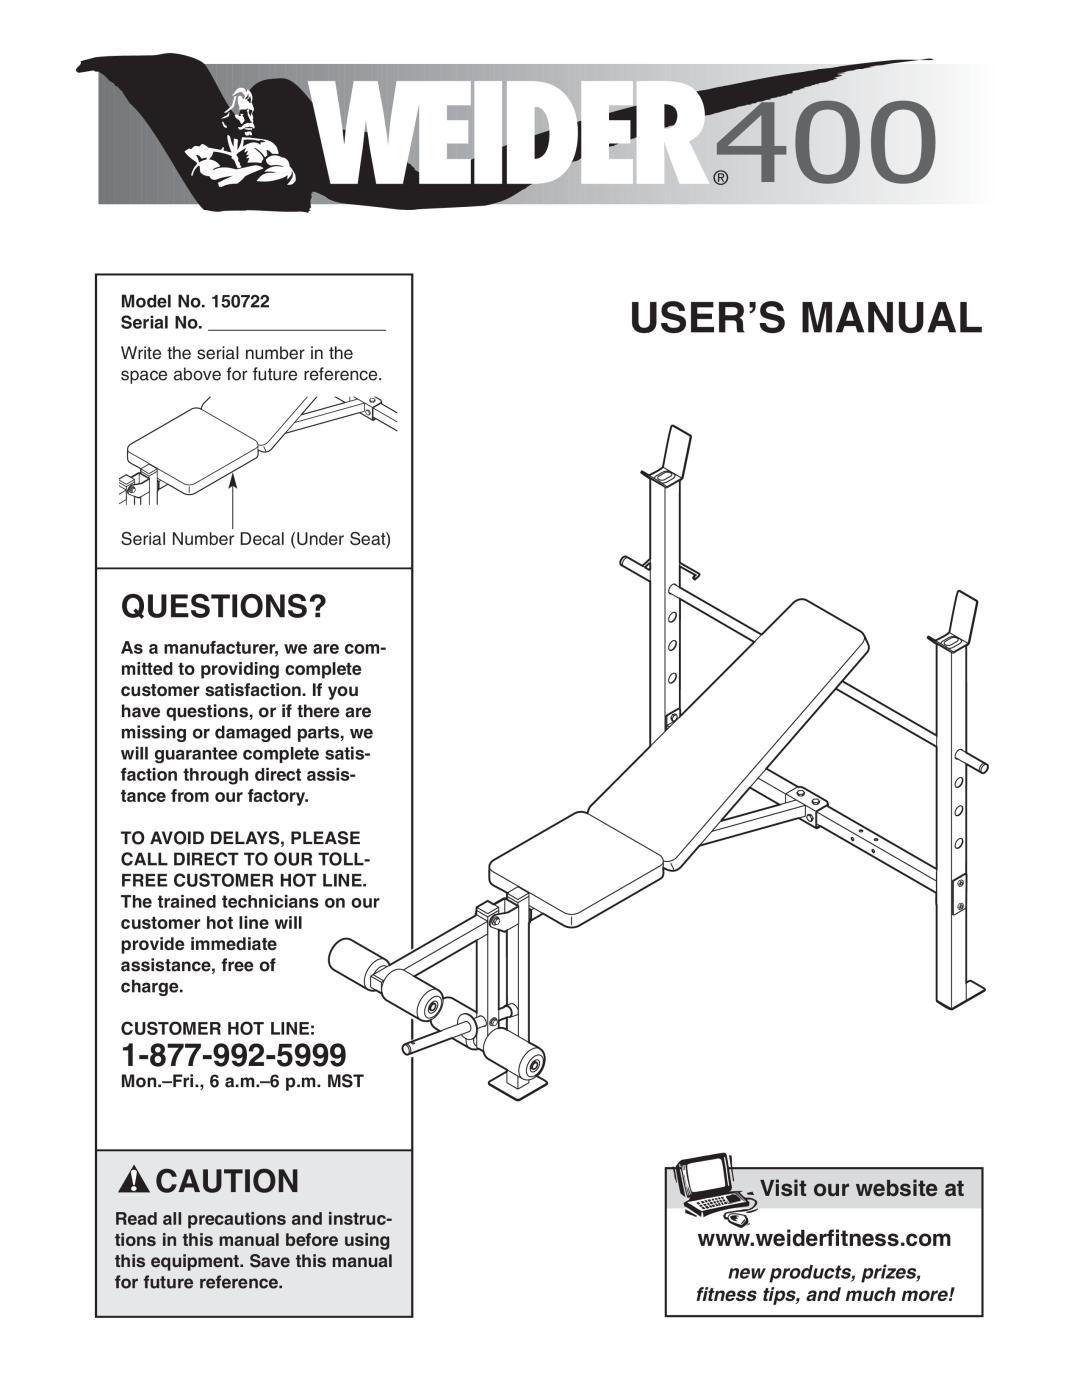 Weider 150722 user manual Questions?, Model No Serial No, charge CUSTOMER HOT LINE, Mon.-Fri., 6 a.m.-6 p.m. MST 